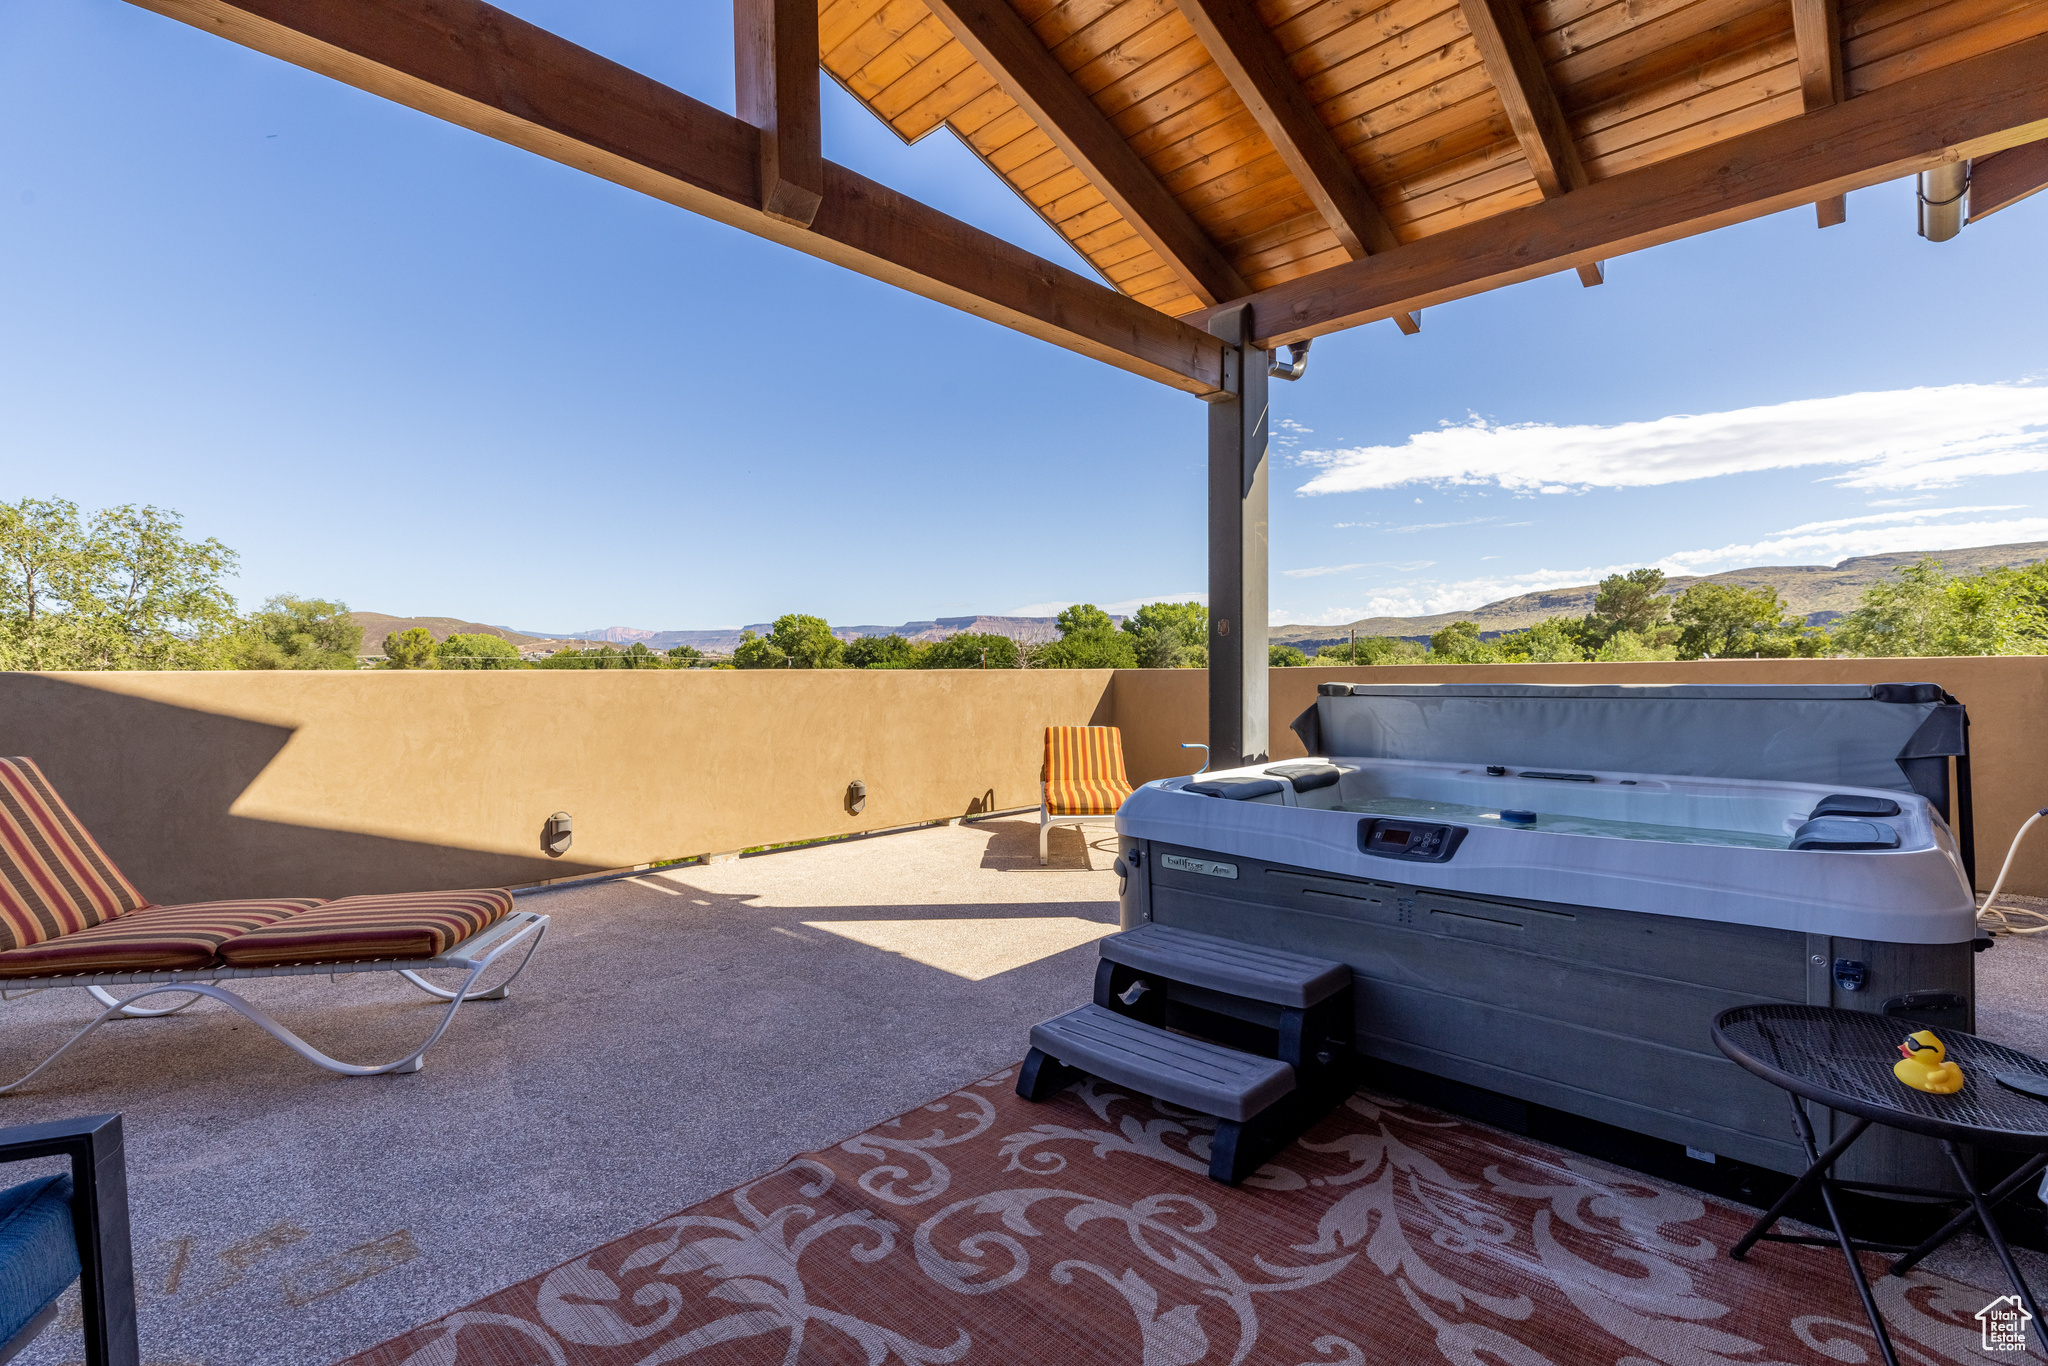 Spa deck with terrific views of Zion park Kolob Canyons, Pine Mountain and Hurrican Cliffs